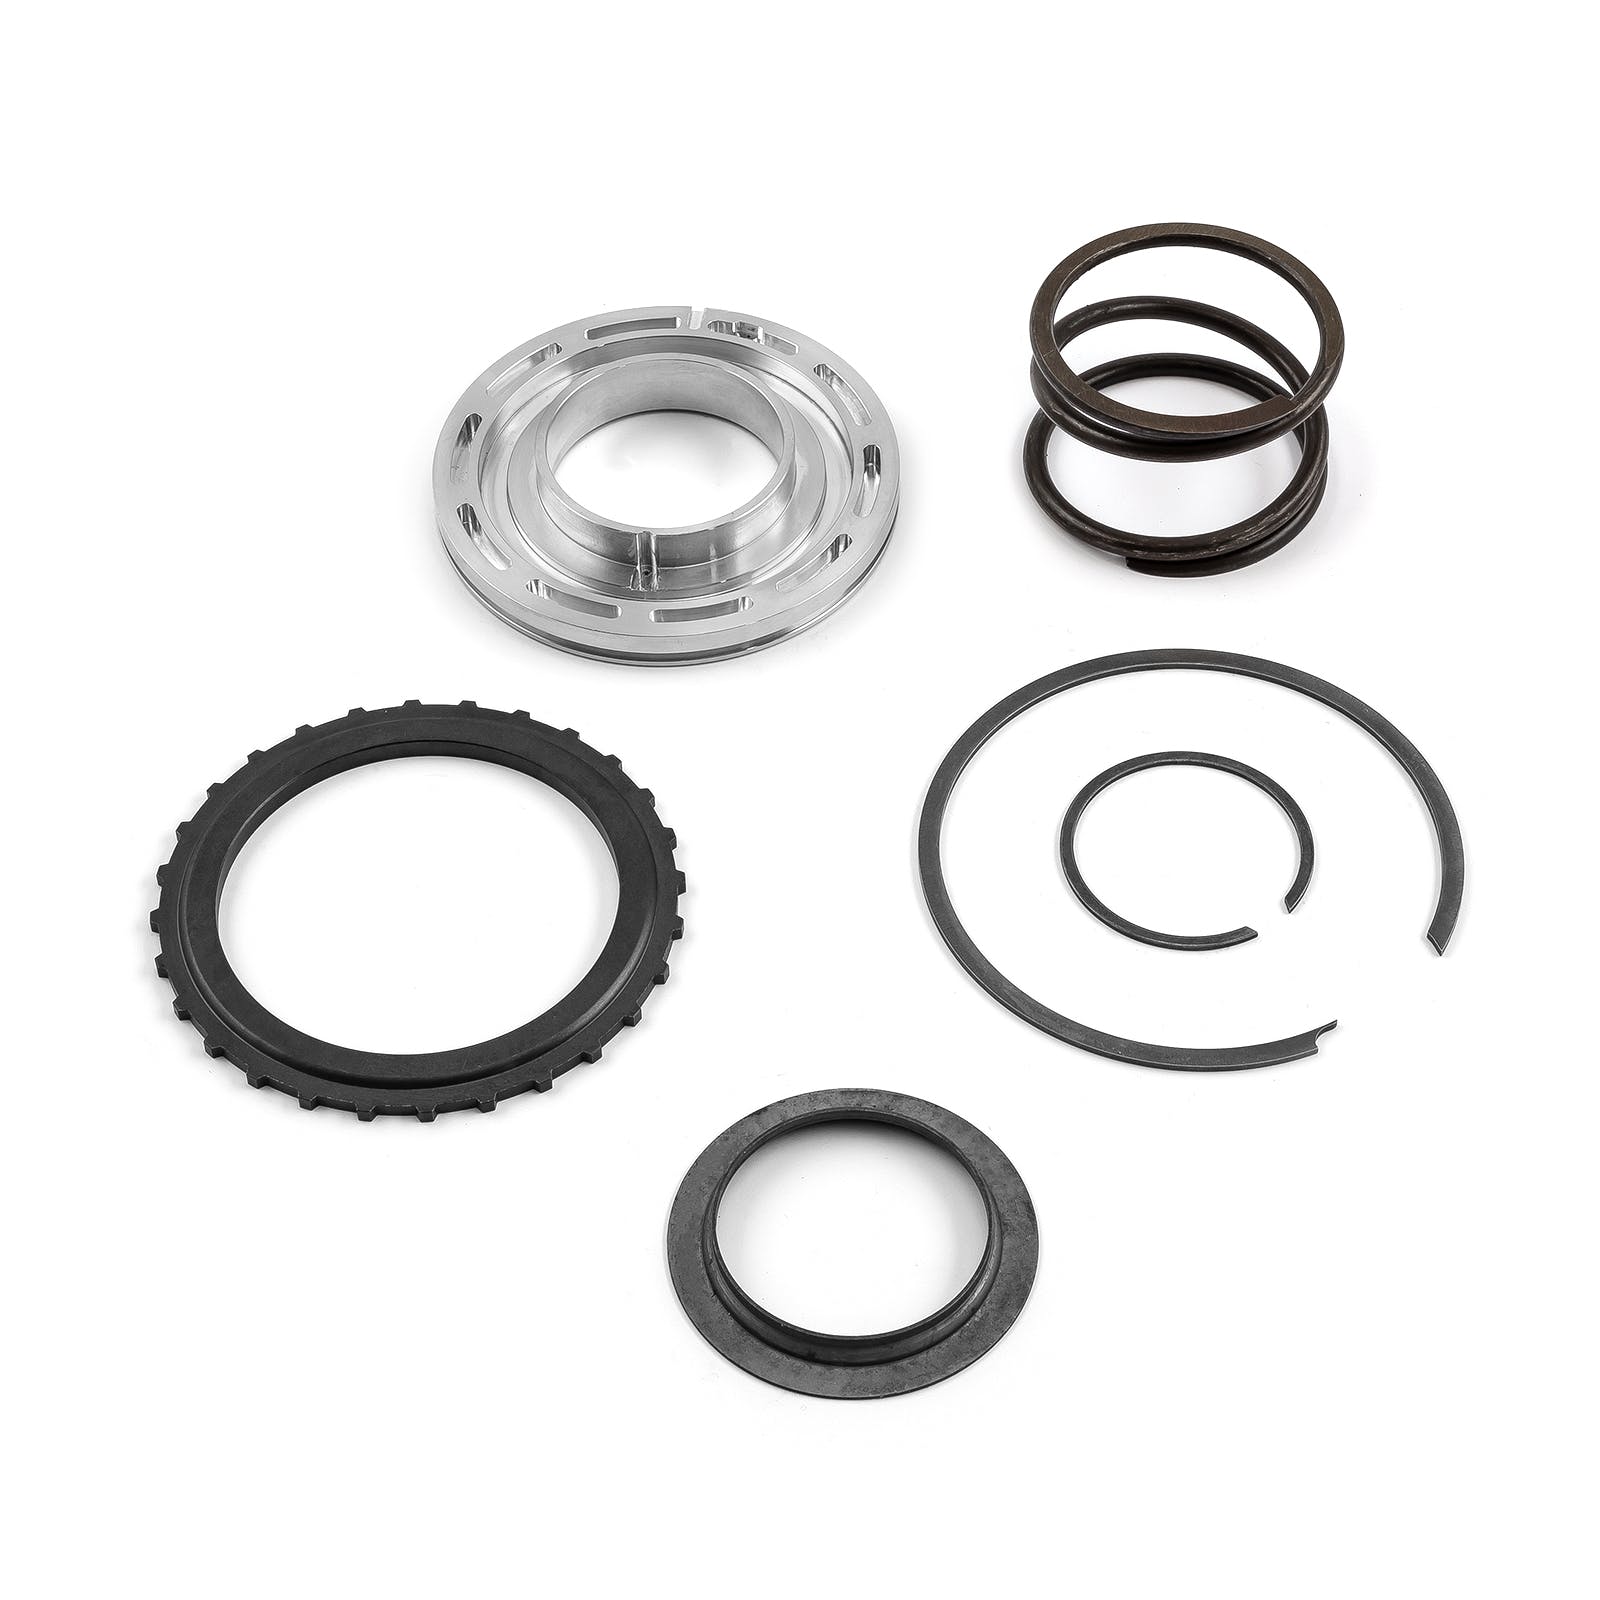 Speedmaster PCE612.1014 Direct Clutch Piston with Return Spring and Retainer Kit